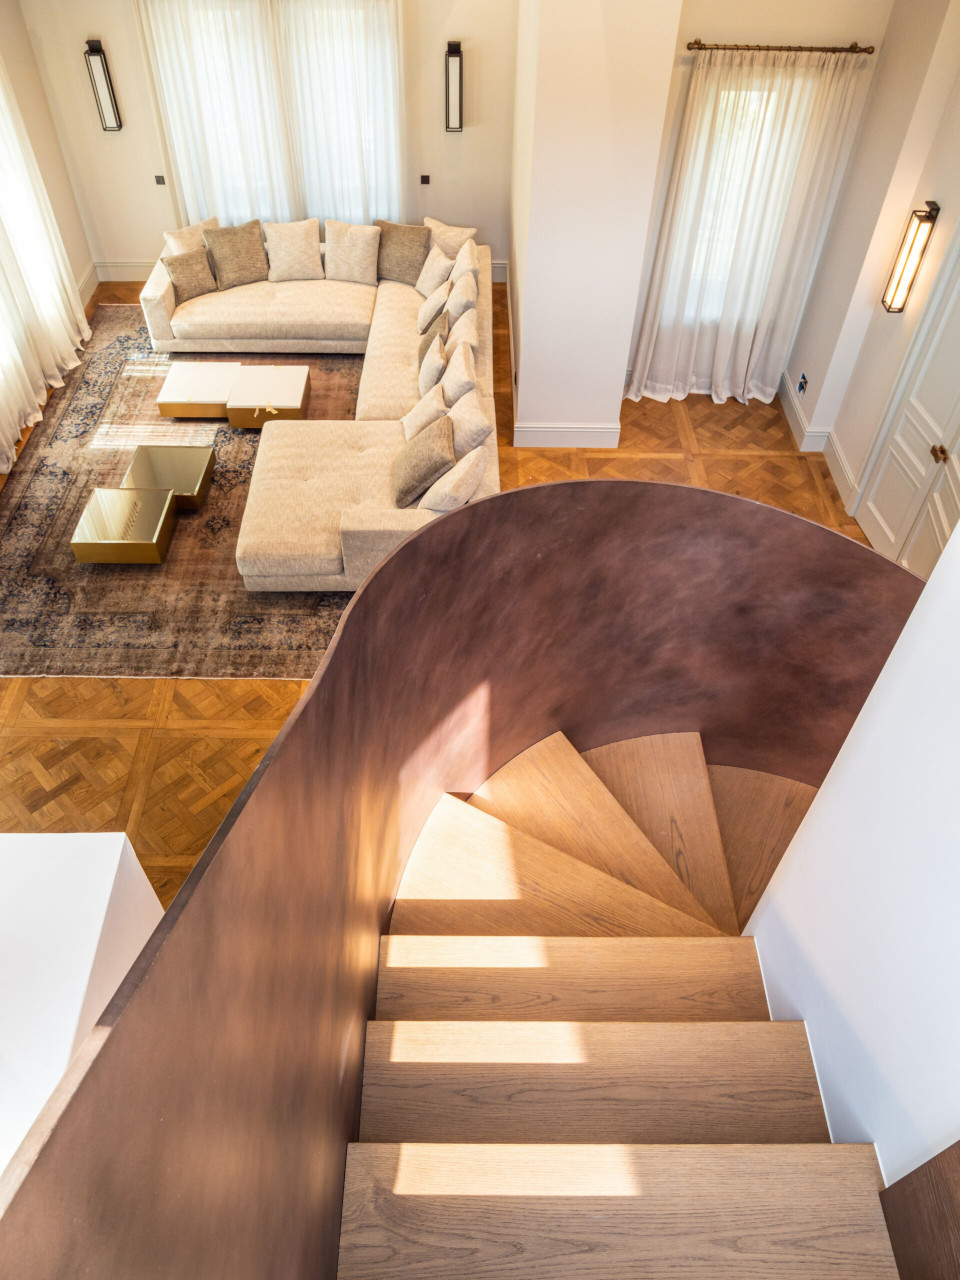 Original interior stairs: example of open staircase Vista Project, an extraordinary oak stair in Brescia city